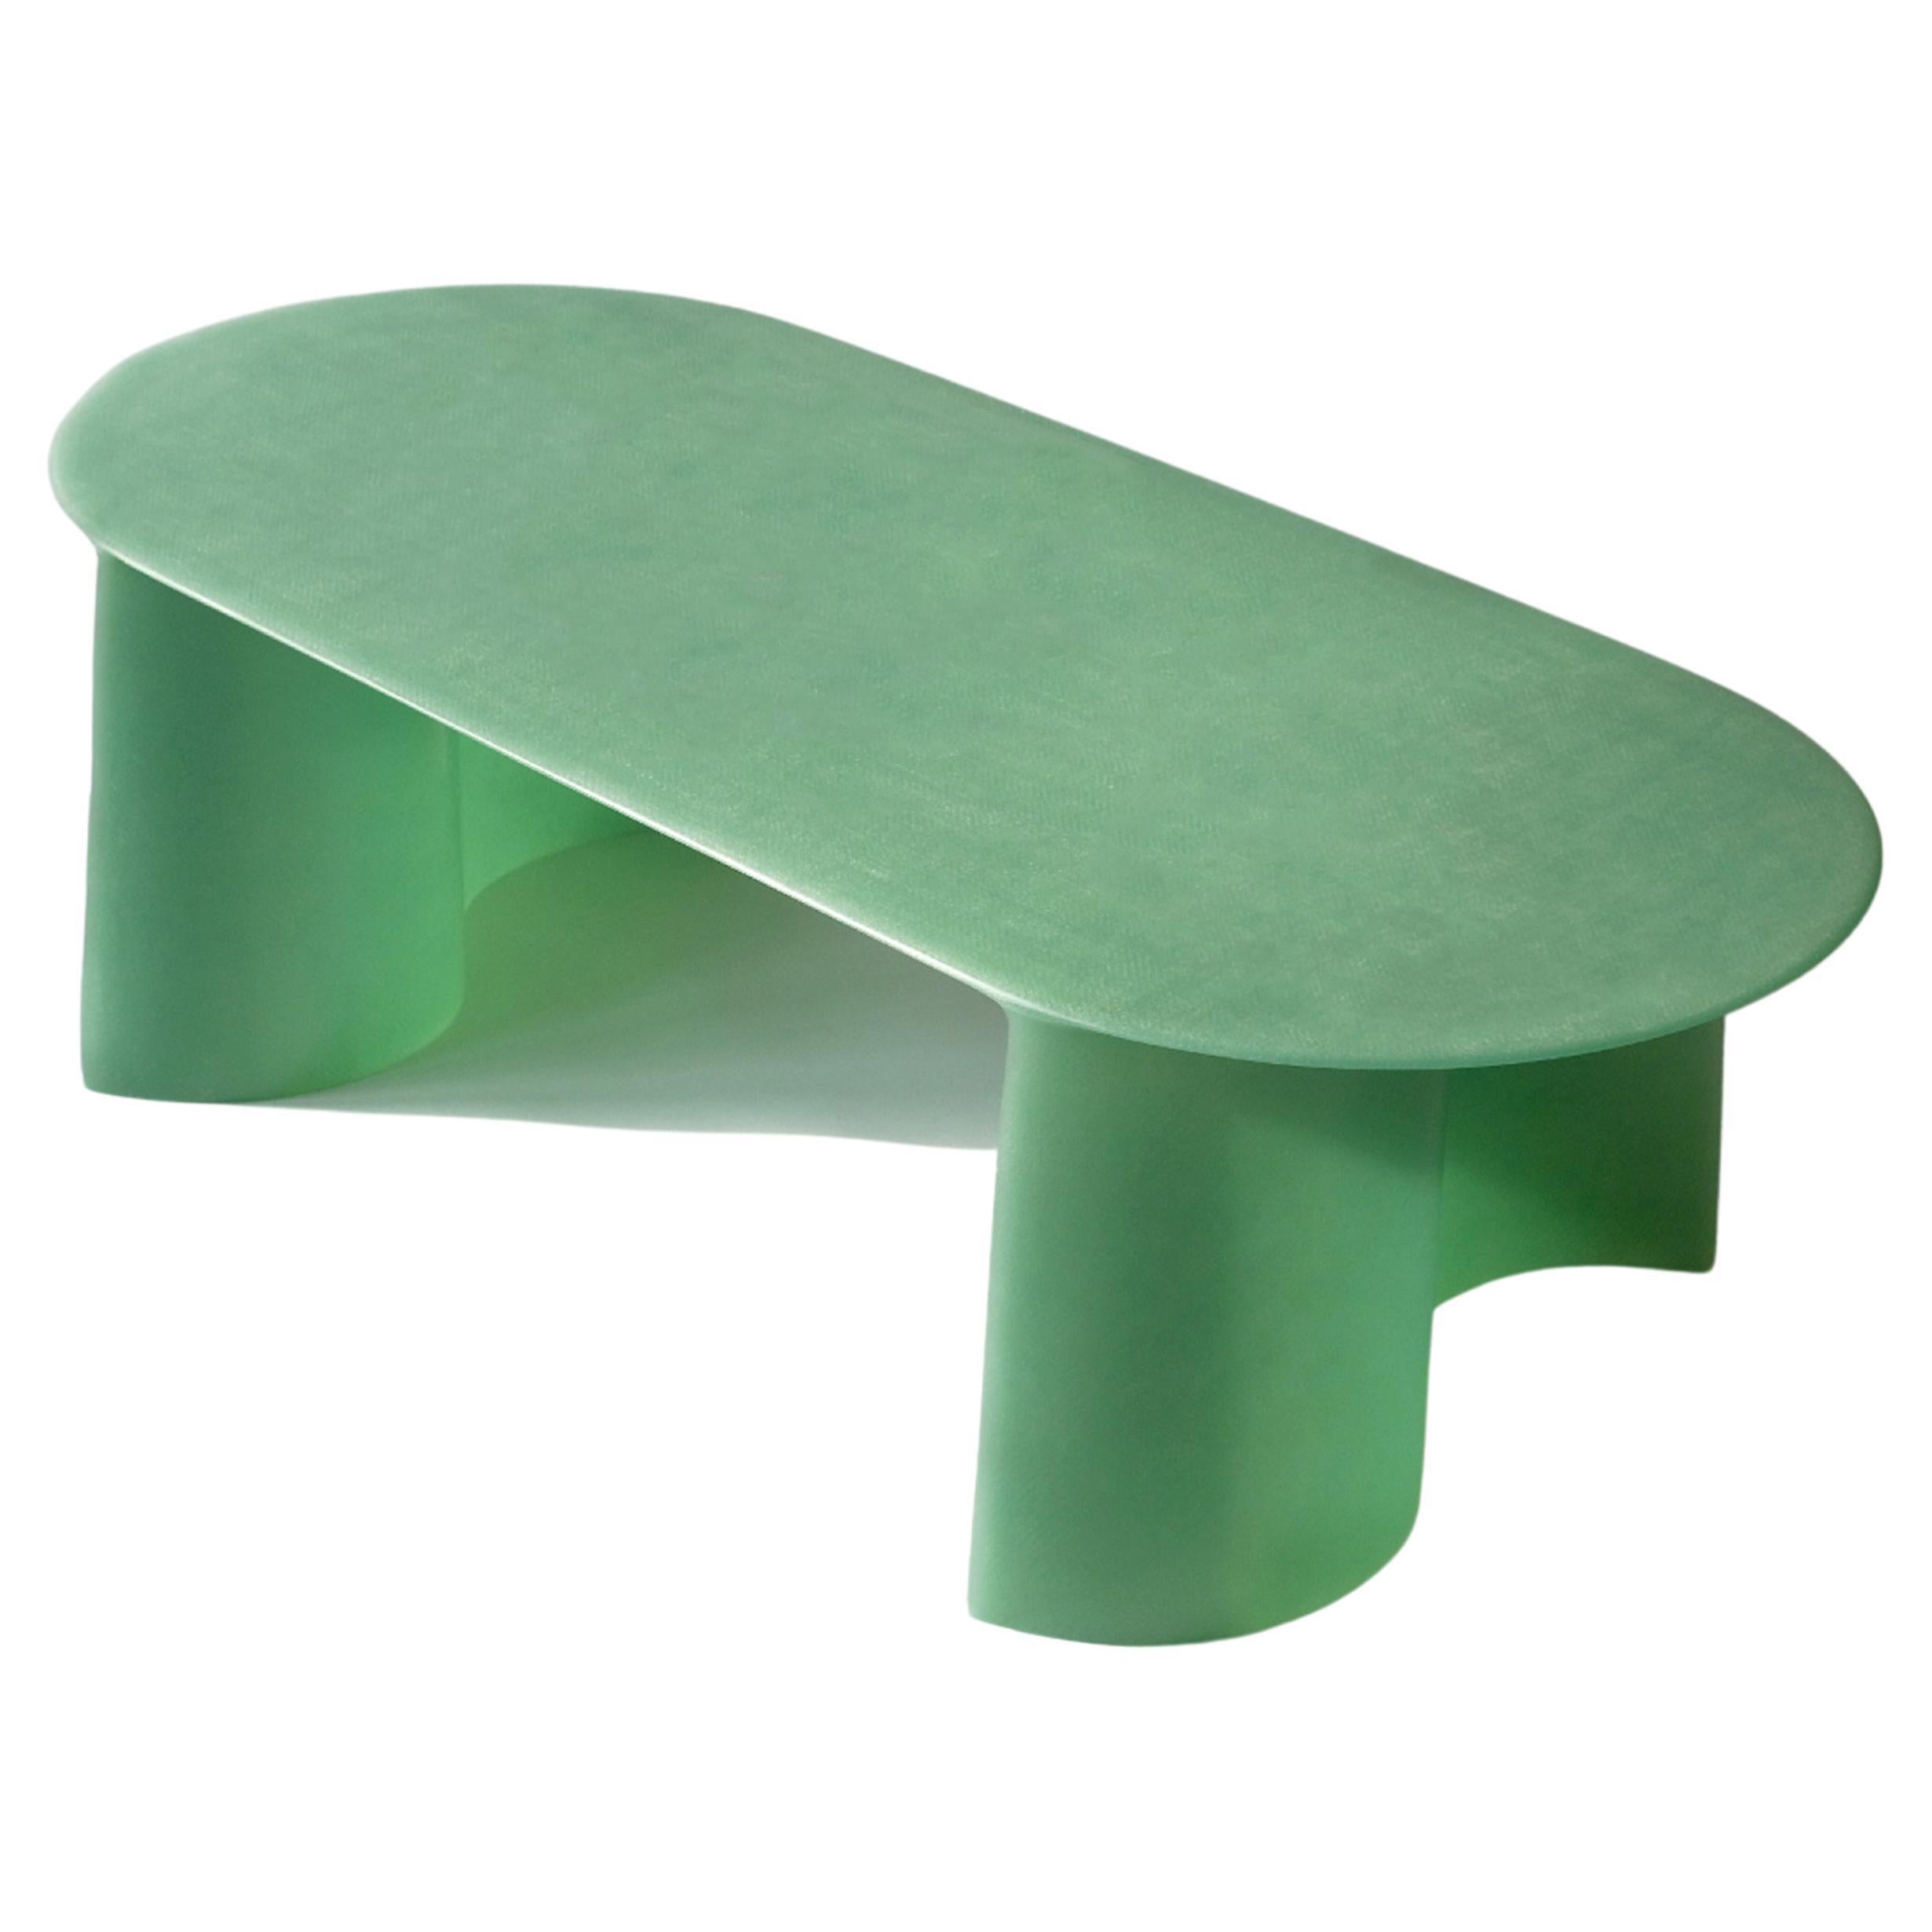 Contemporary Green Fiberglass, New Wave Coffee Table small, by Lukas Cober